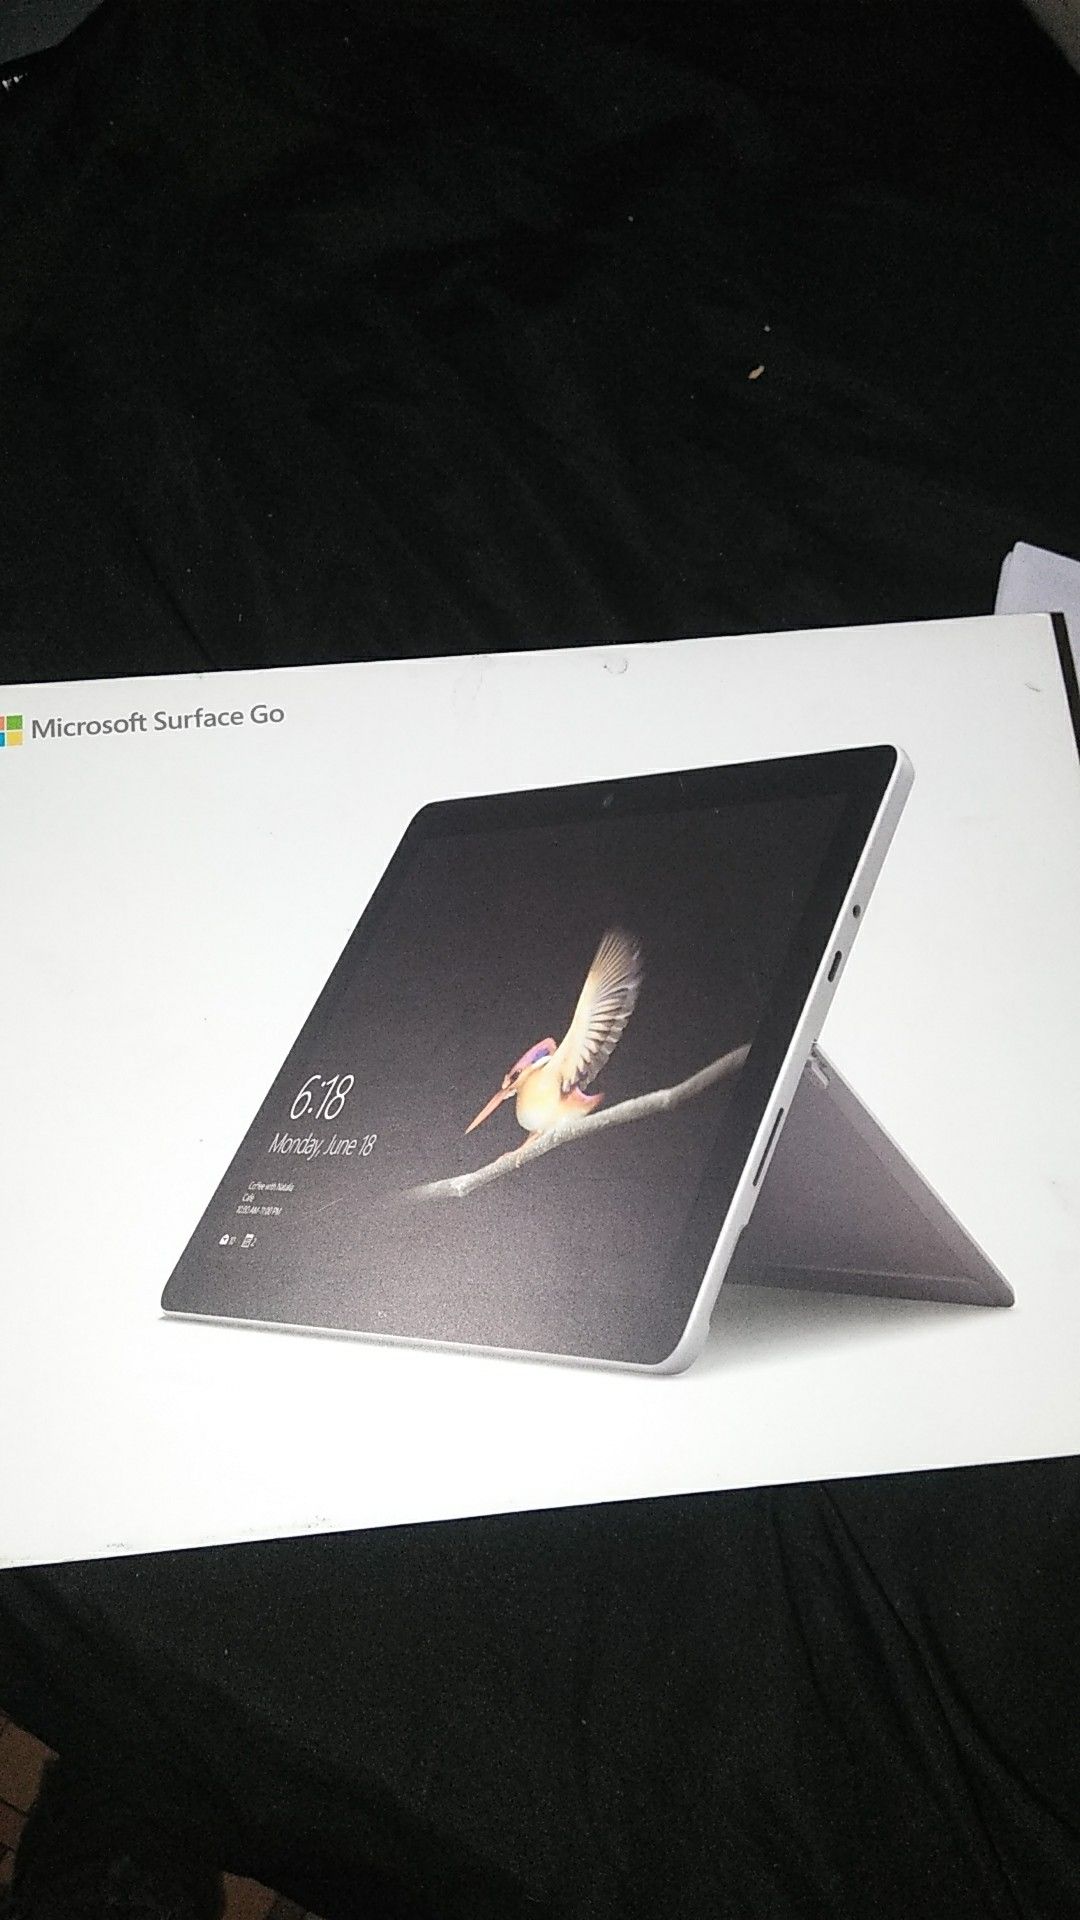 Microsoft Surface Go (Keyboard & Case WILL BE EXTRA)